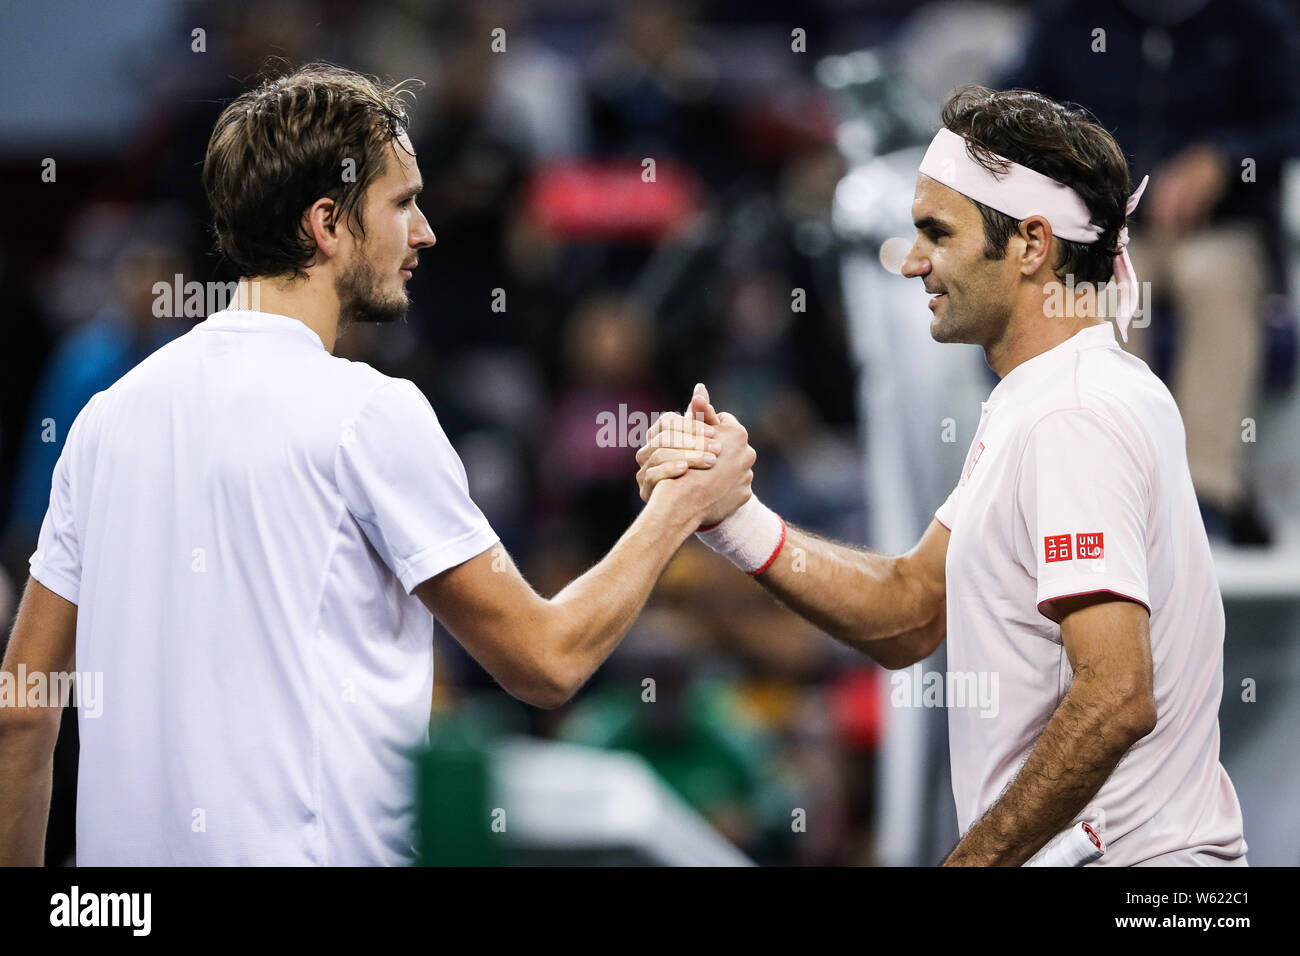 Roger Federer, right, of Switzerland shakes hands with Daniil Medvedev of Russia after their second round match of the men's singles during the Rolex Stock Photo